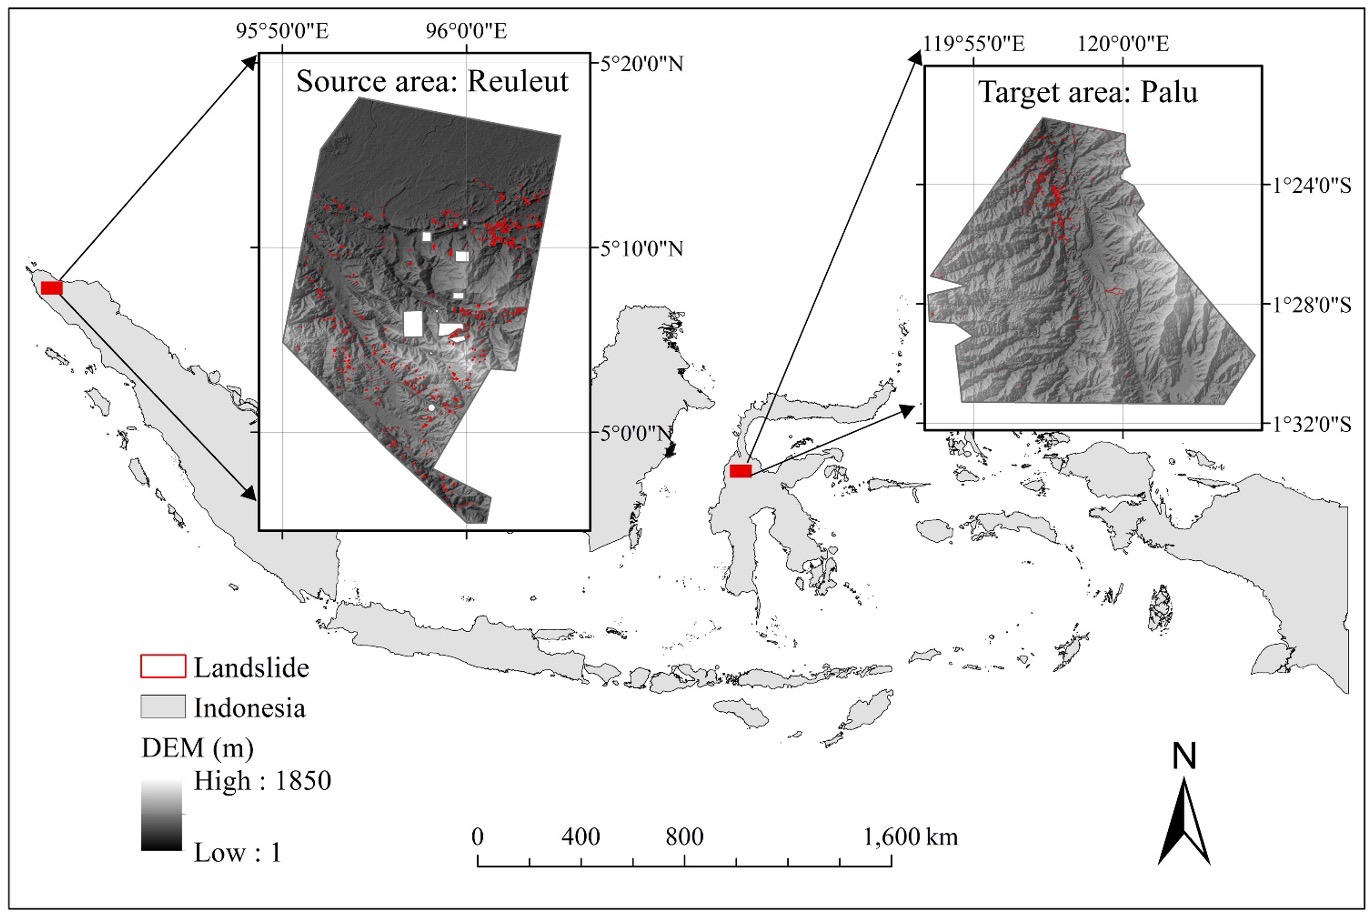 Locations of the study areas in Indonesia and their landslide inventories.